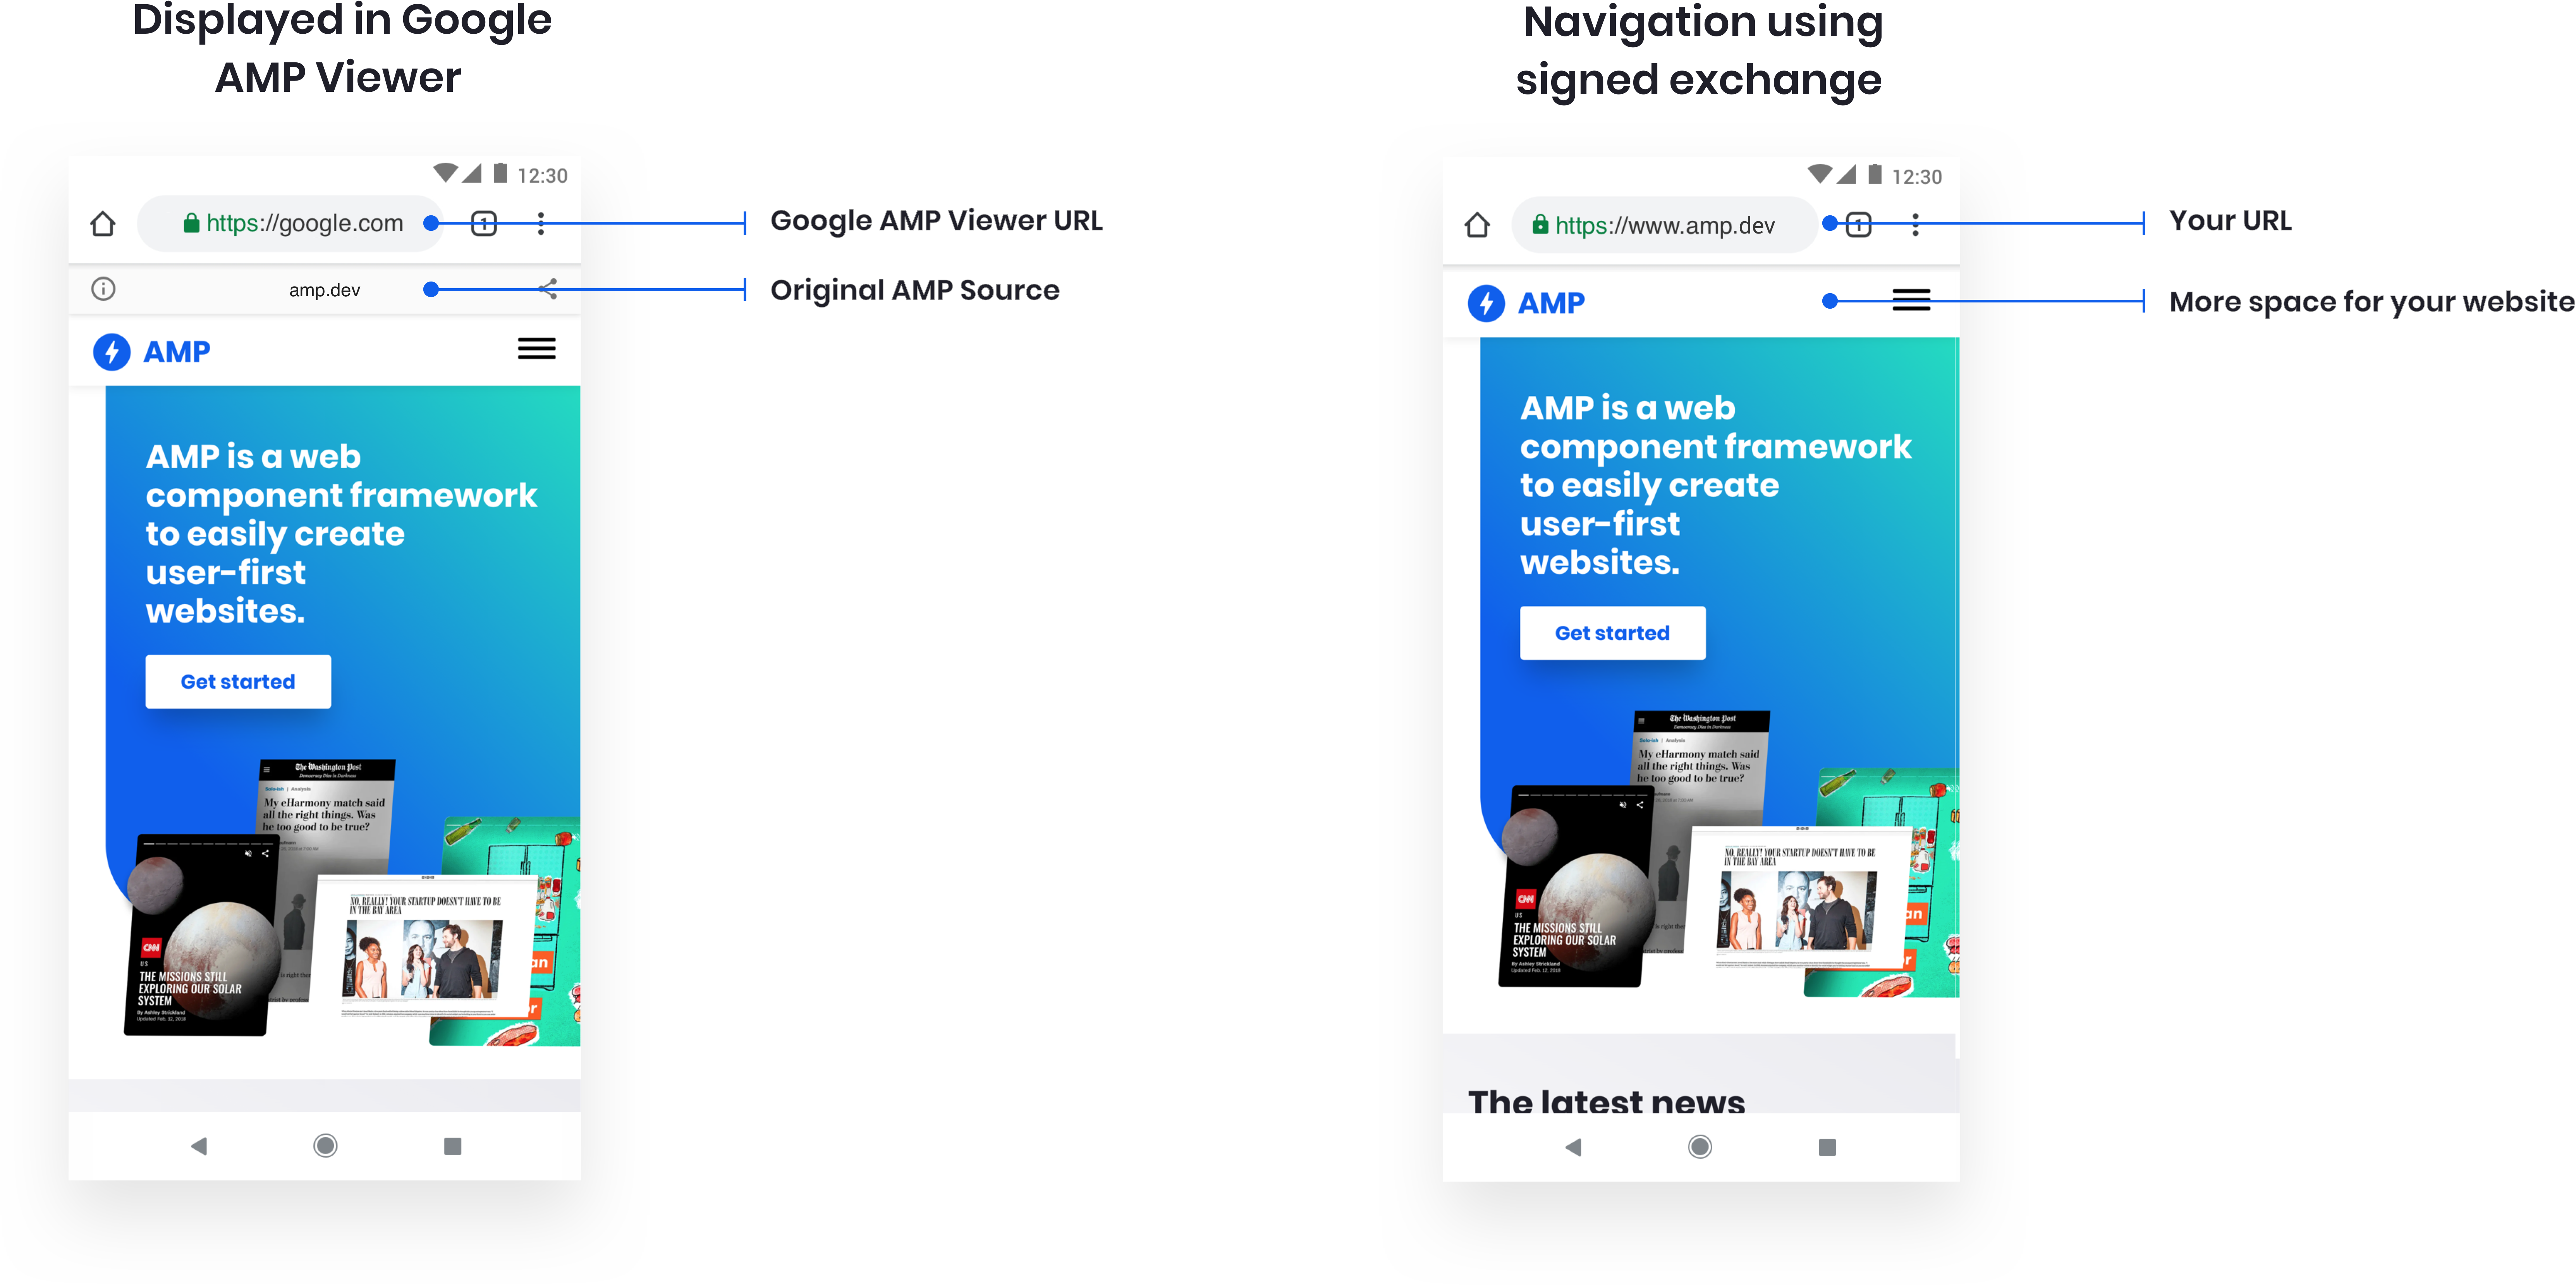 An illustration that compares how AMP content can be displayed. The first image shows AMP content displayed in the Google AMP Viewer. The callouts point out the Google AMP Viewer URL and the Original AMP Source bar. The second image shows navigation using signed exchange. The callouts point out the website's URL and more space for the website.